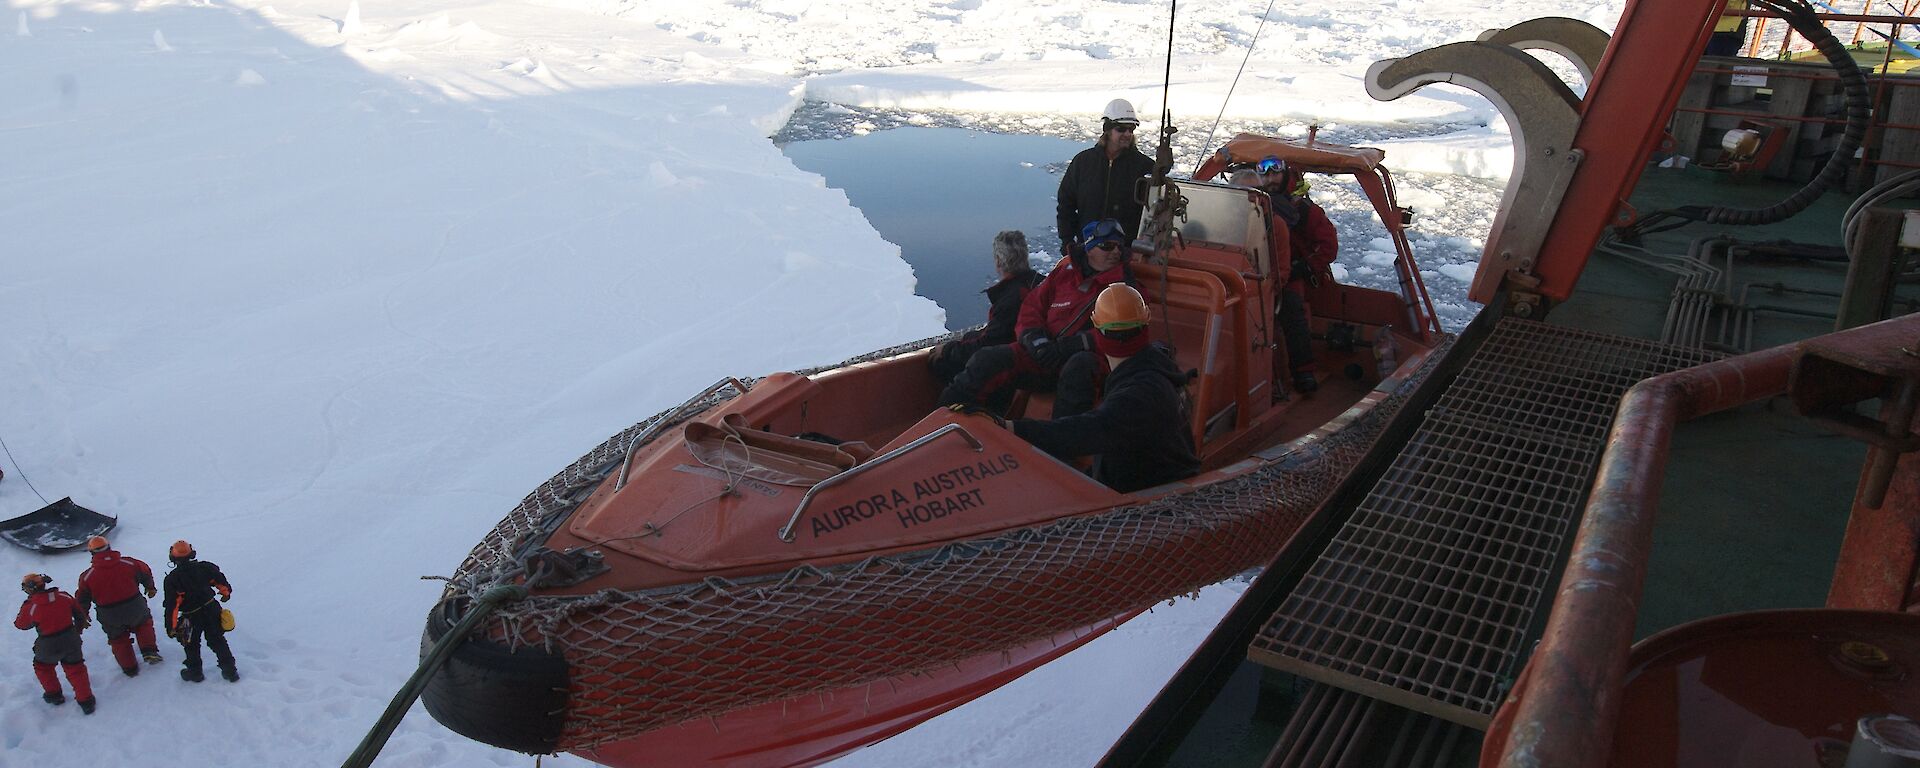 The Aurora Australis’ fast rescue craft lifts passengers from the stricken Russian vessel Akademik Shokalskiy, which became trapped in thick sea ice in 2013, from a sea ice floe on to the Australian ship.